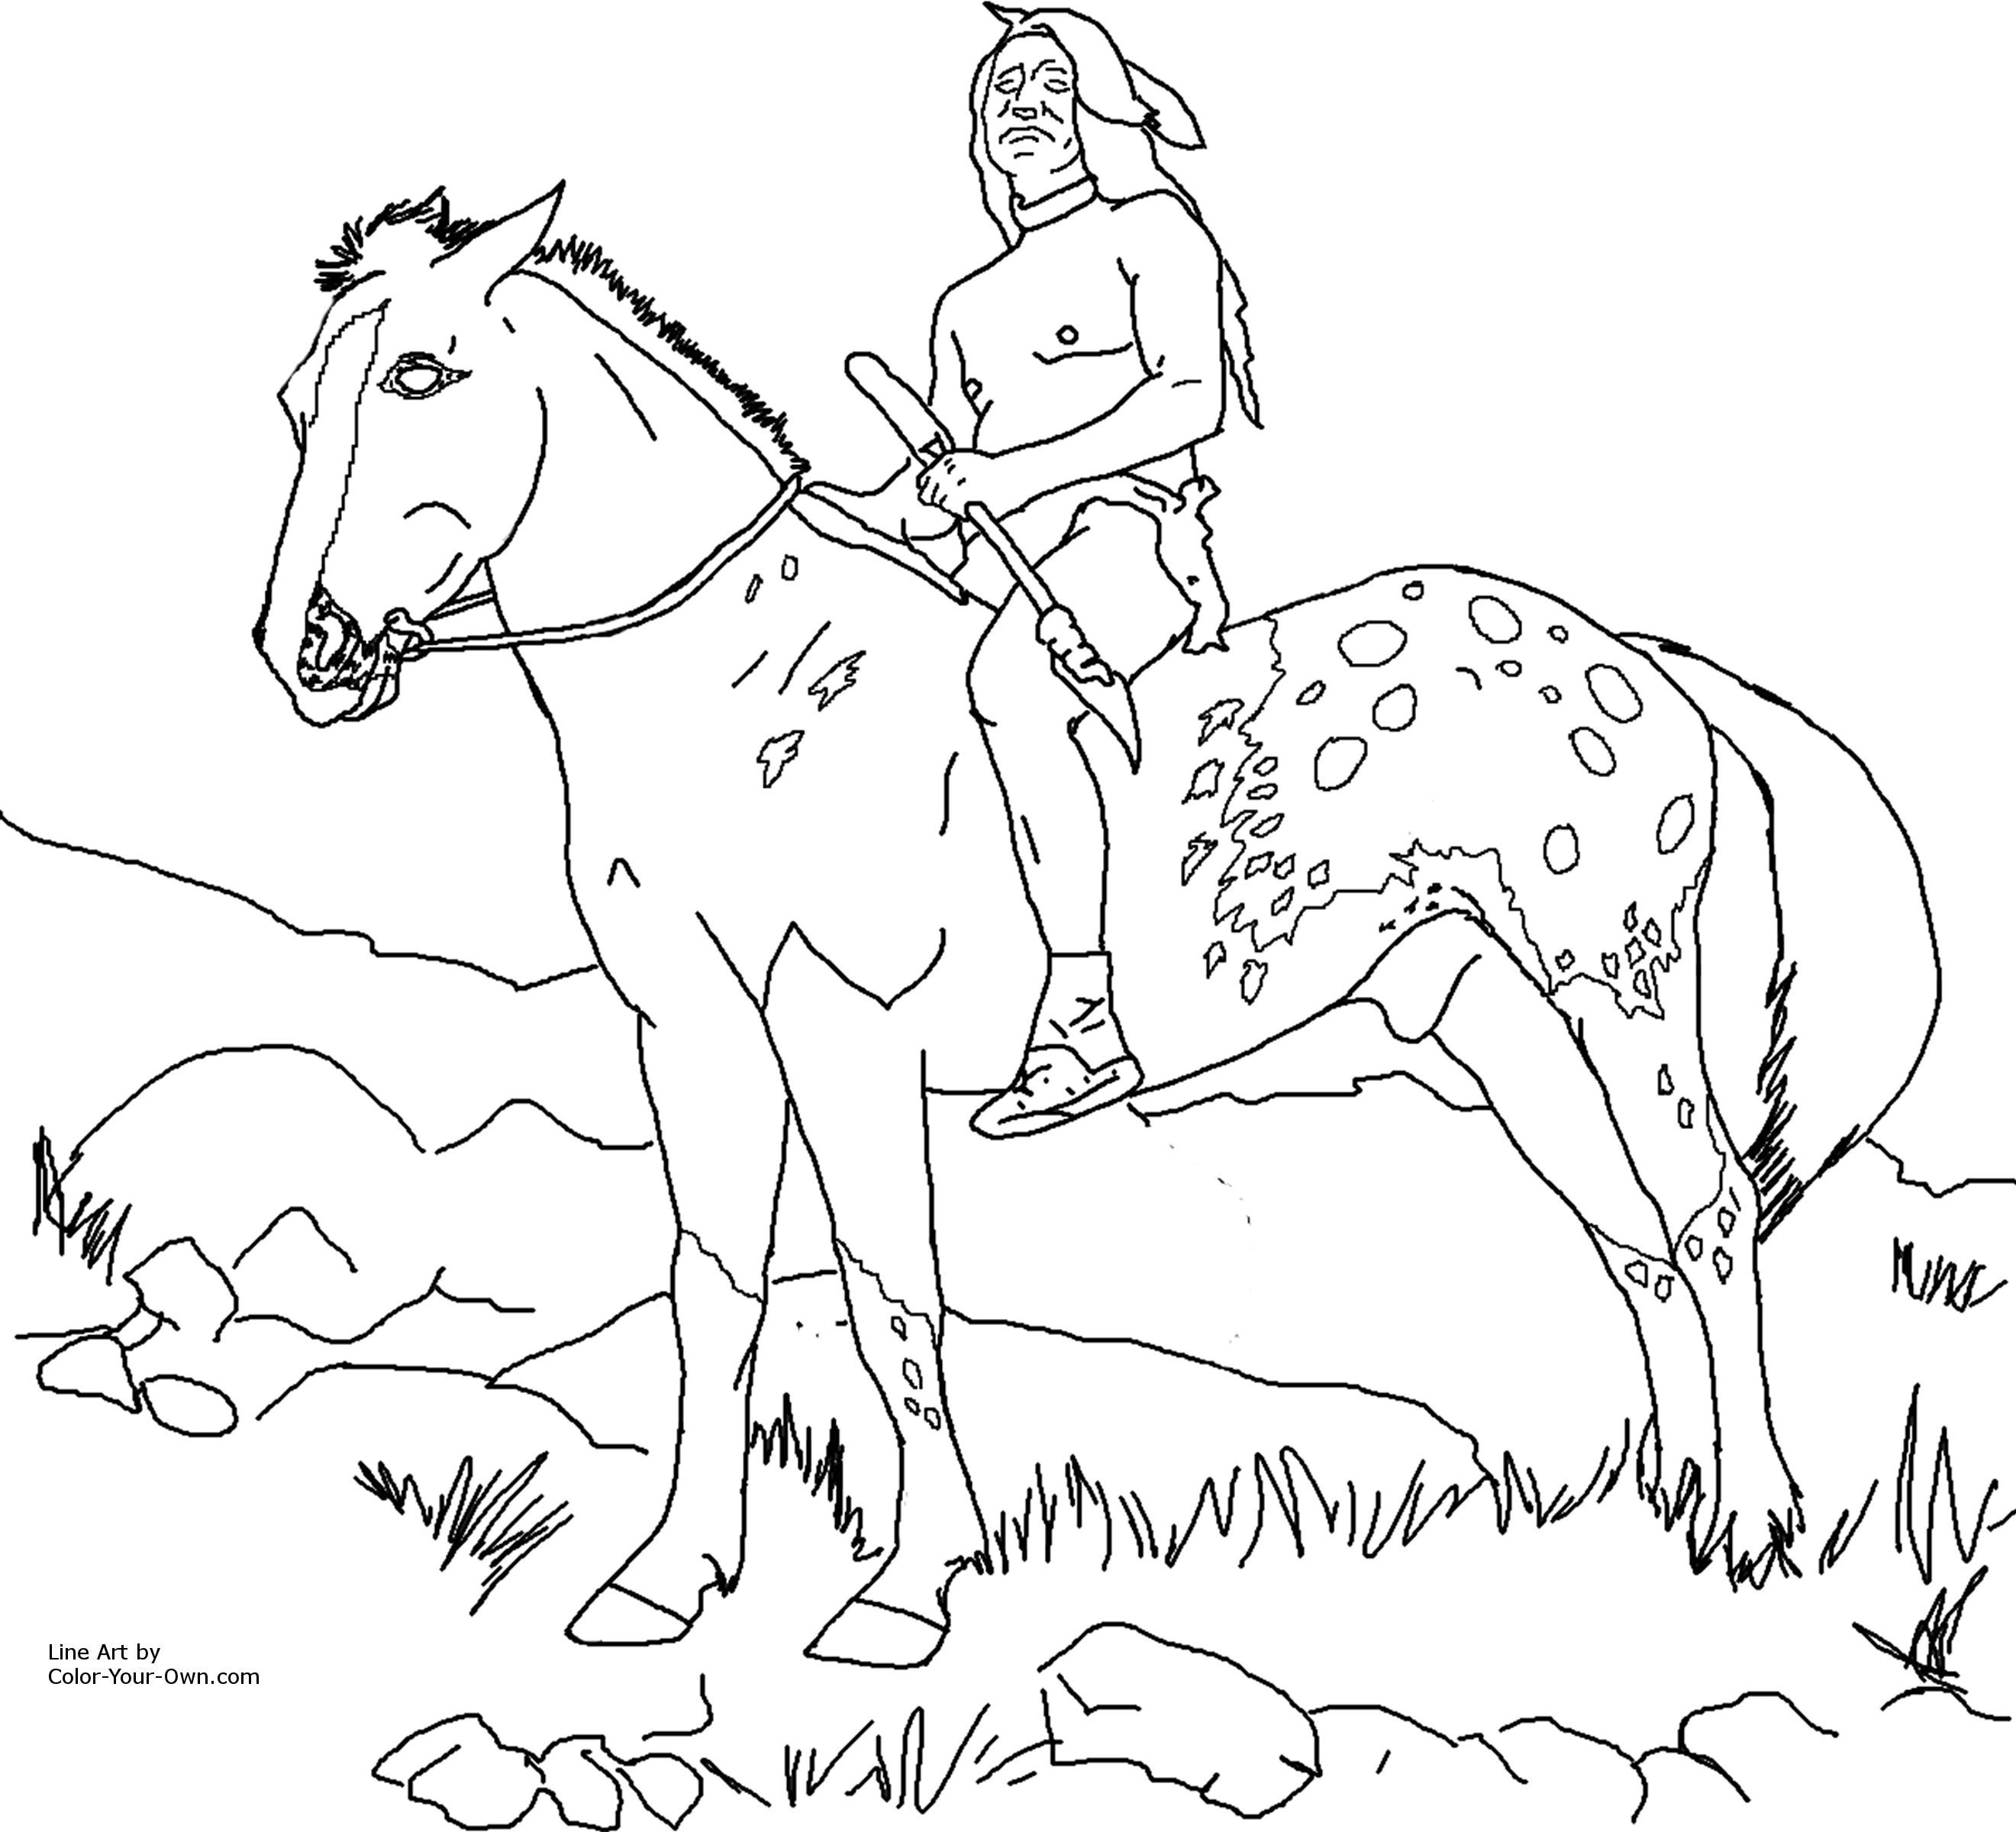 Native American Coloring Page | Coloring Pages for Kids and for Adults